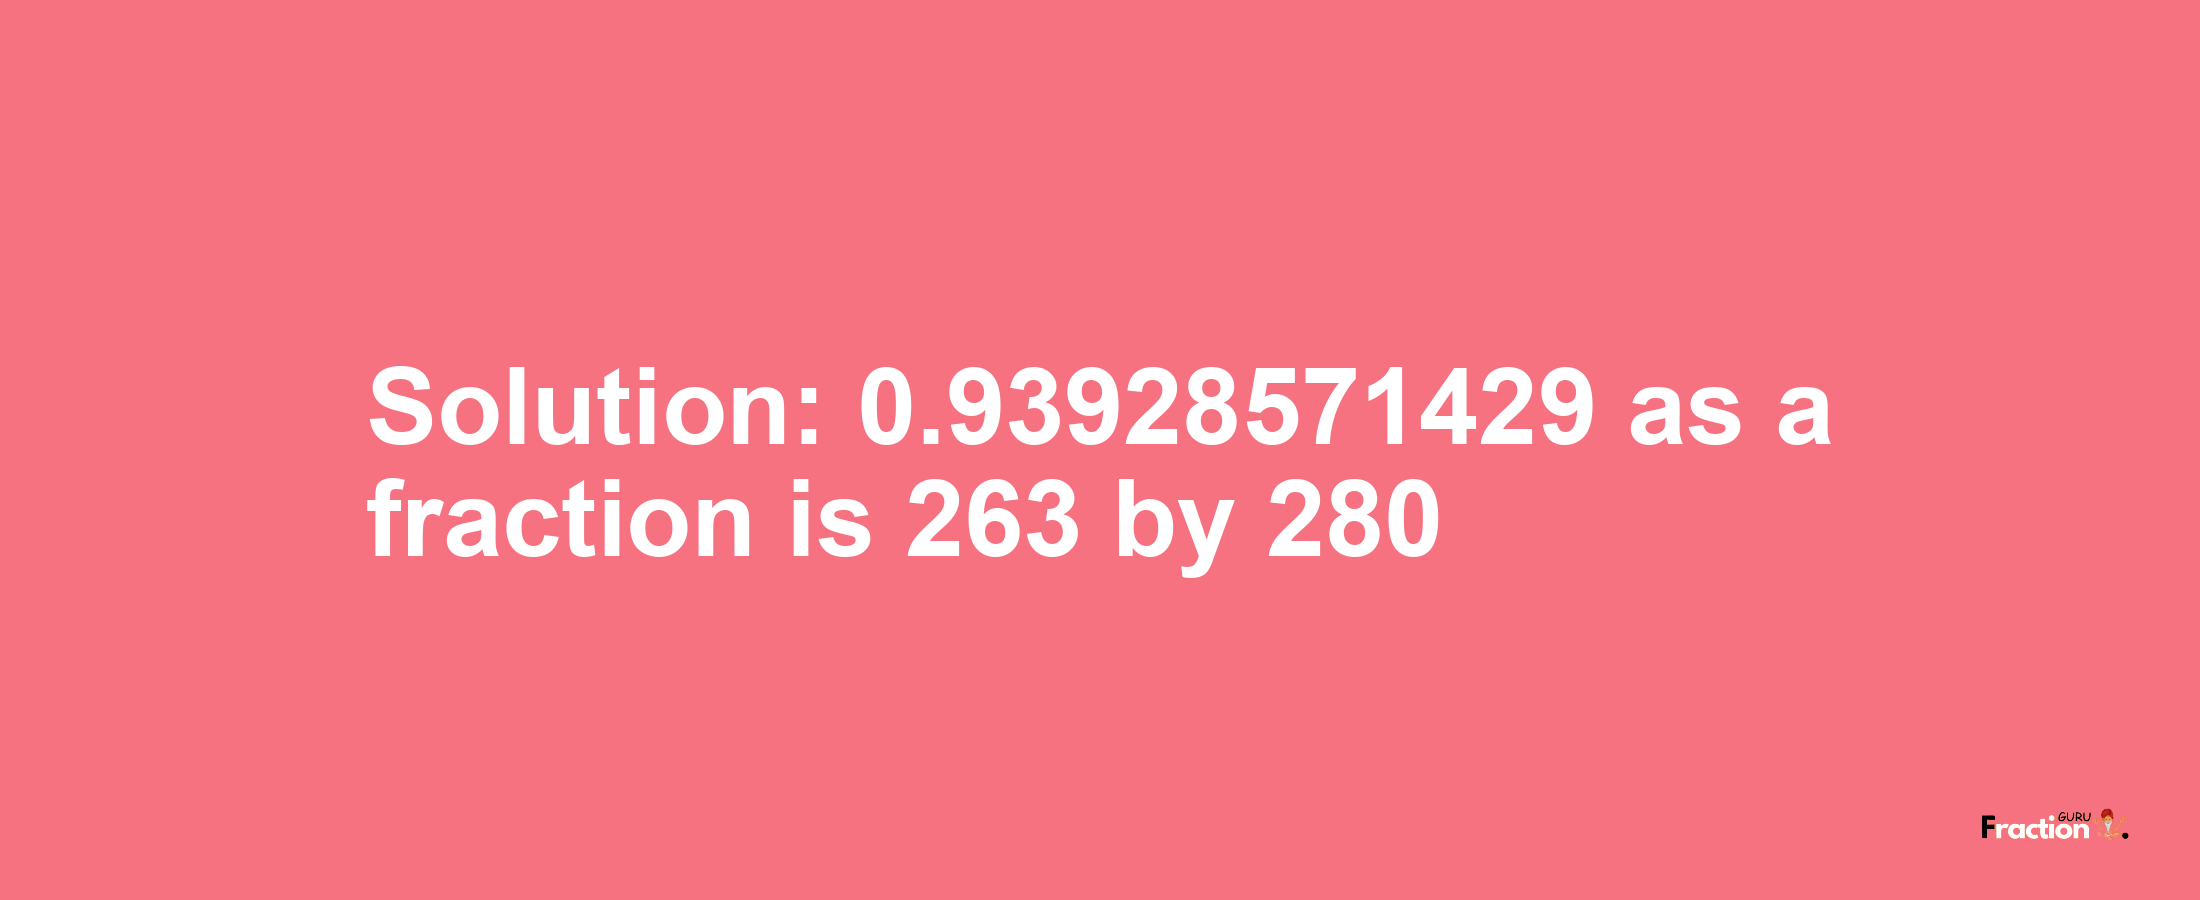 Solution:0.93928571429 as a fraction is 263/280